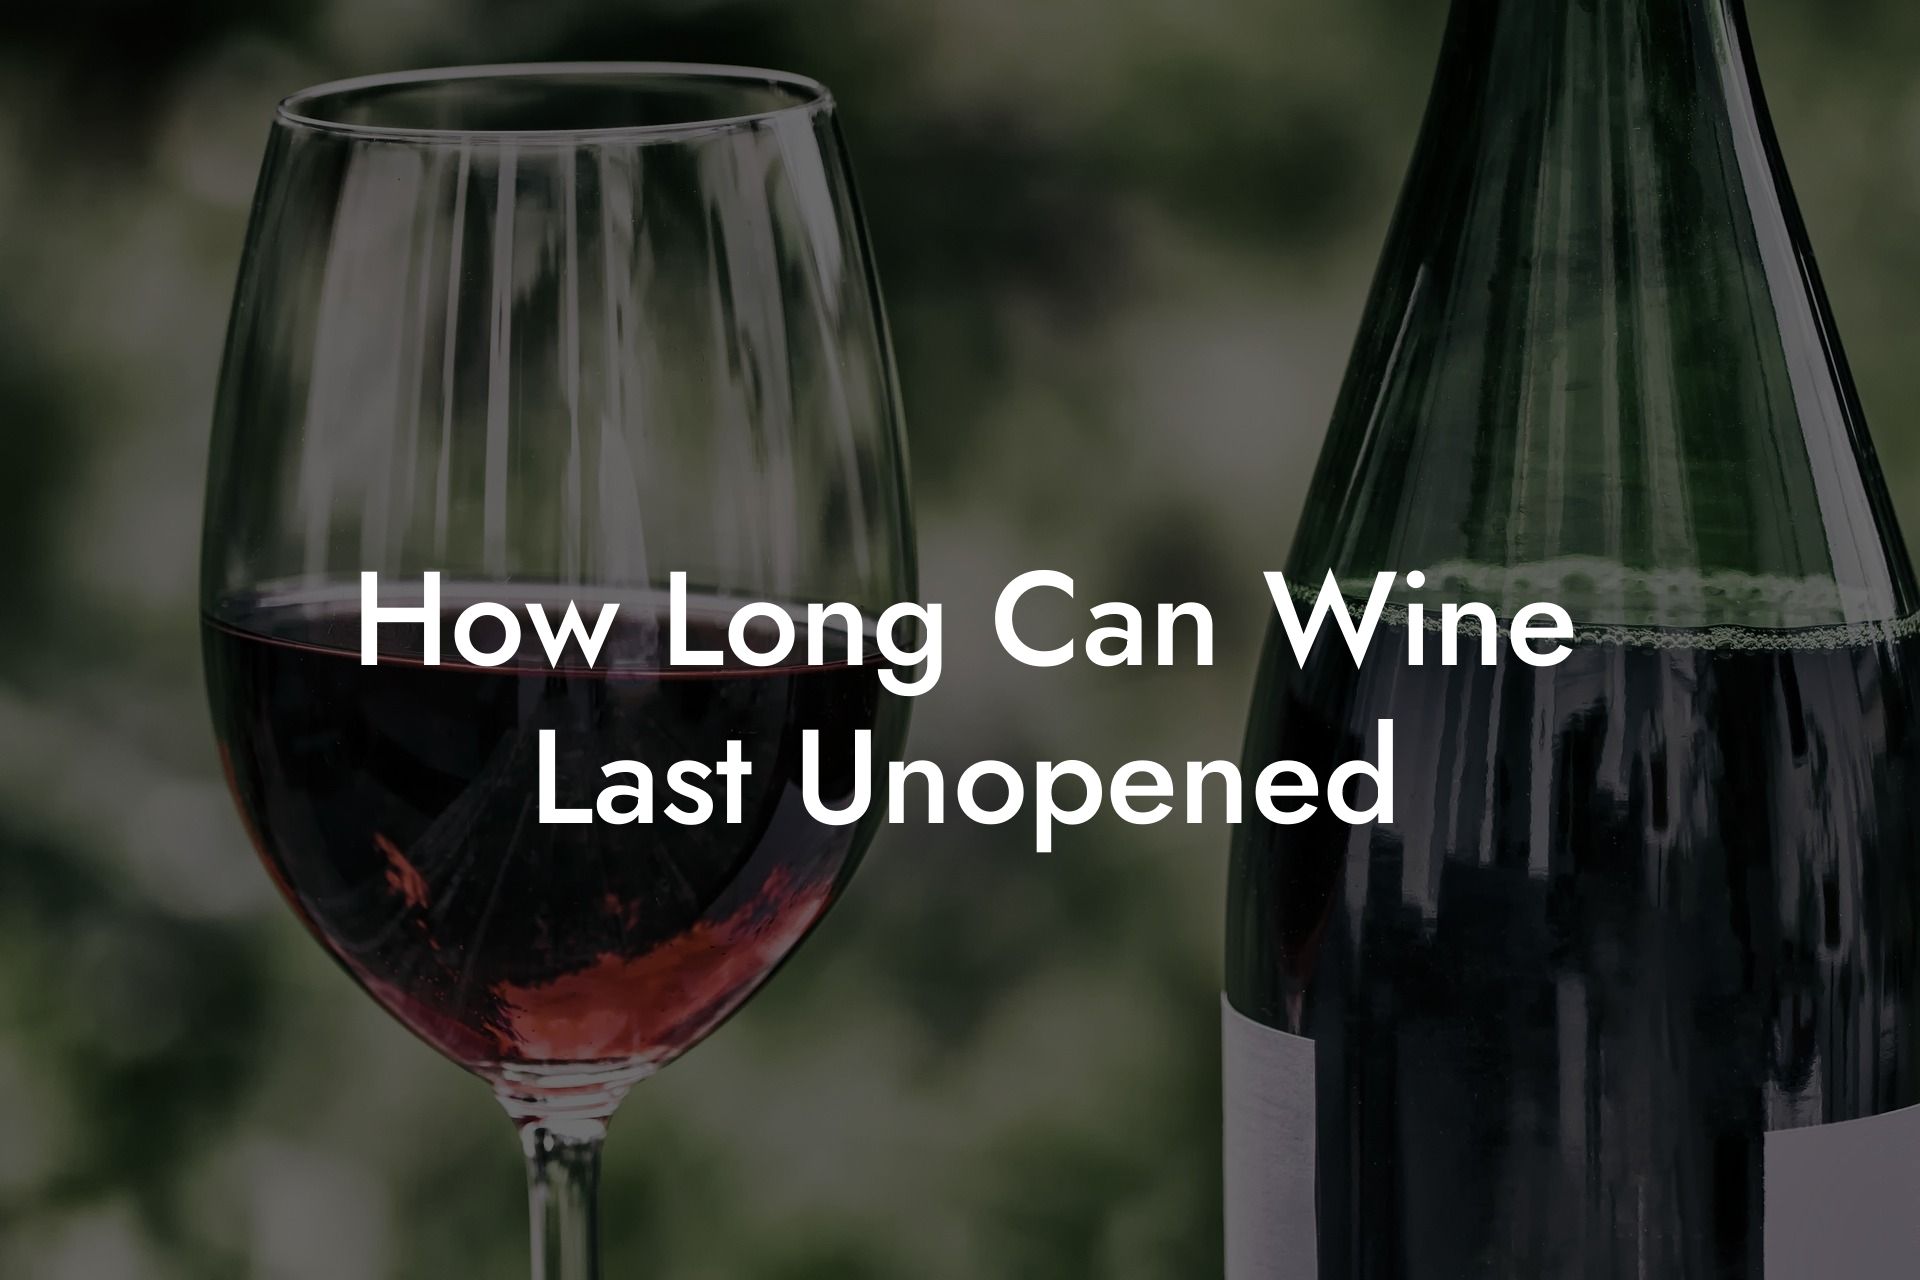 How Long Can Wine Last Unopened